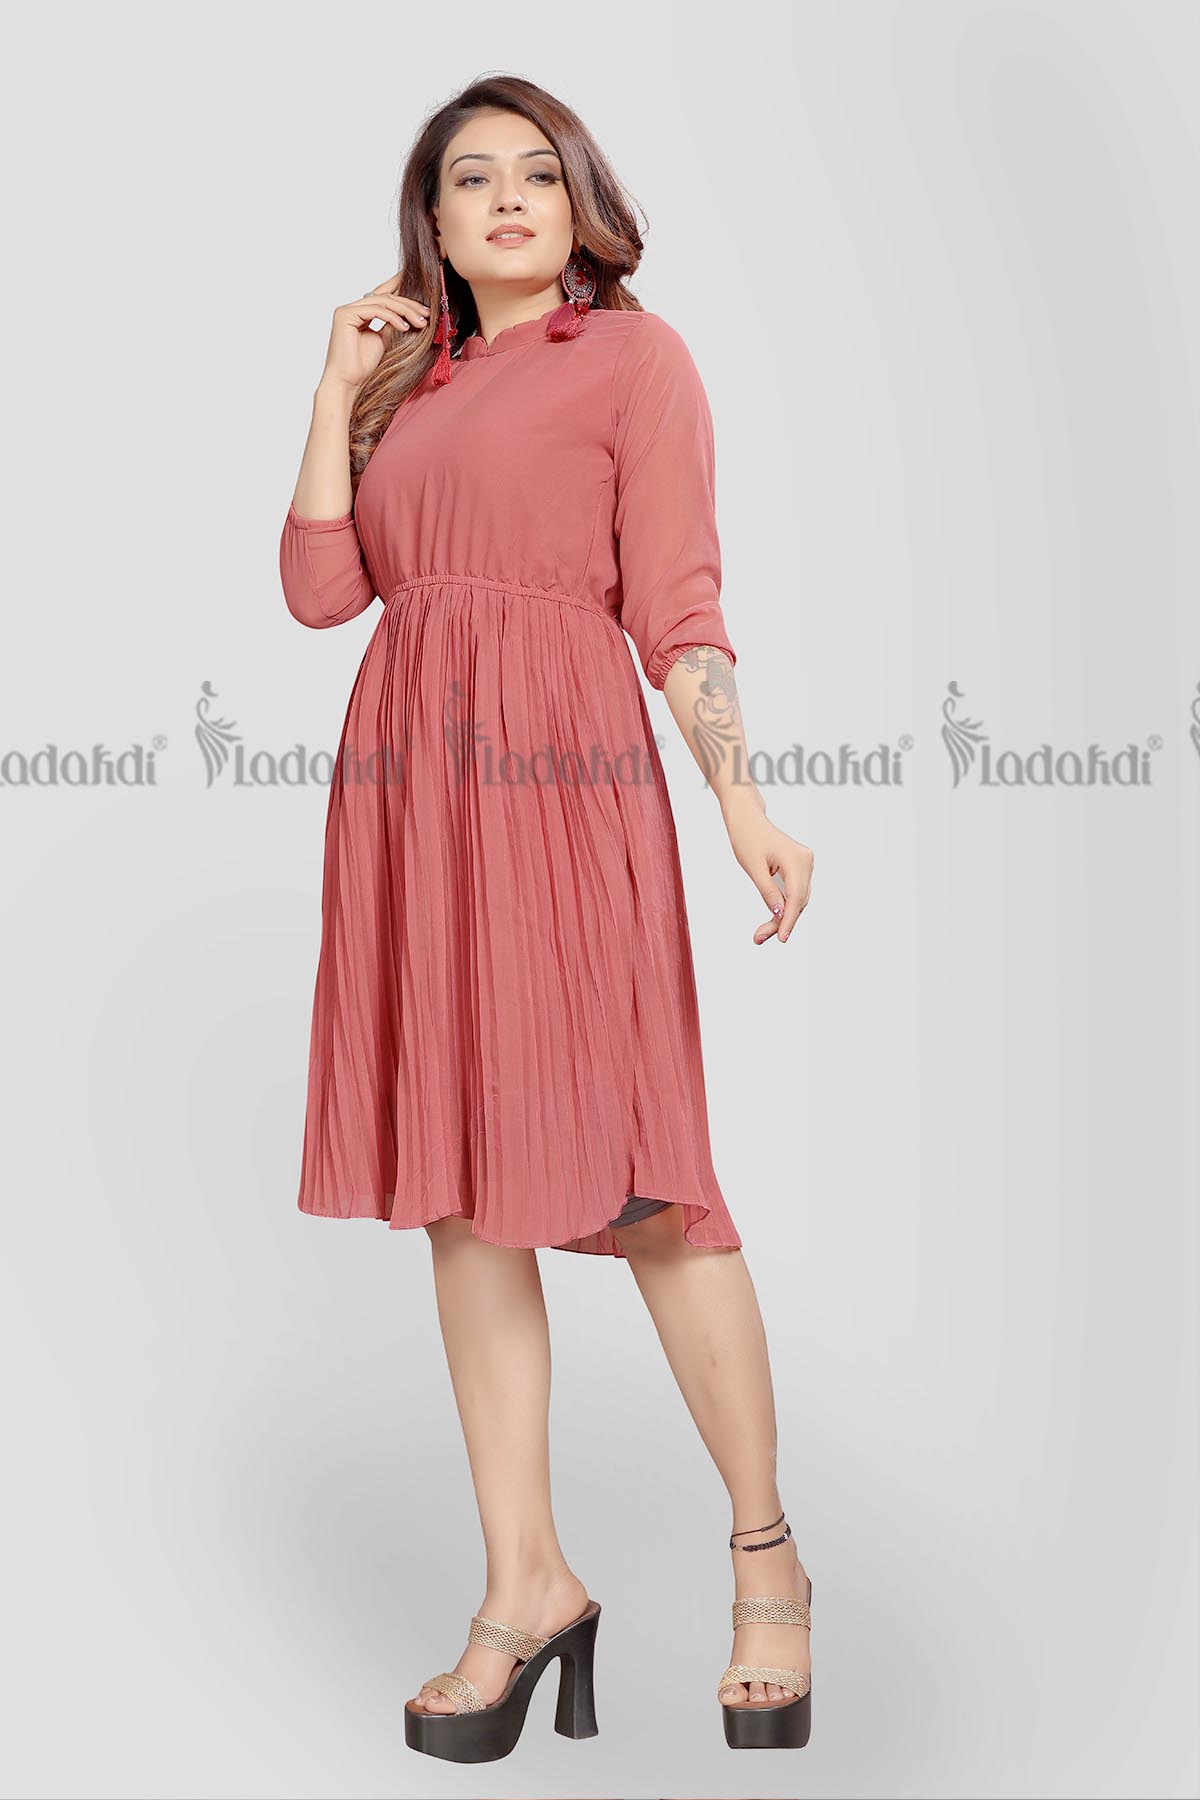 Get Discounted Red Dresses for Women Online Today!